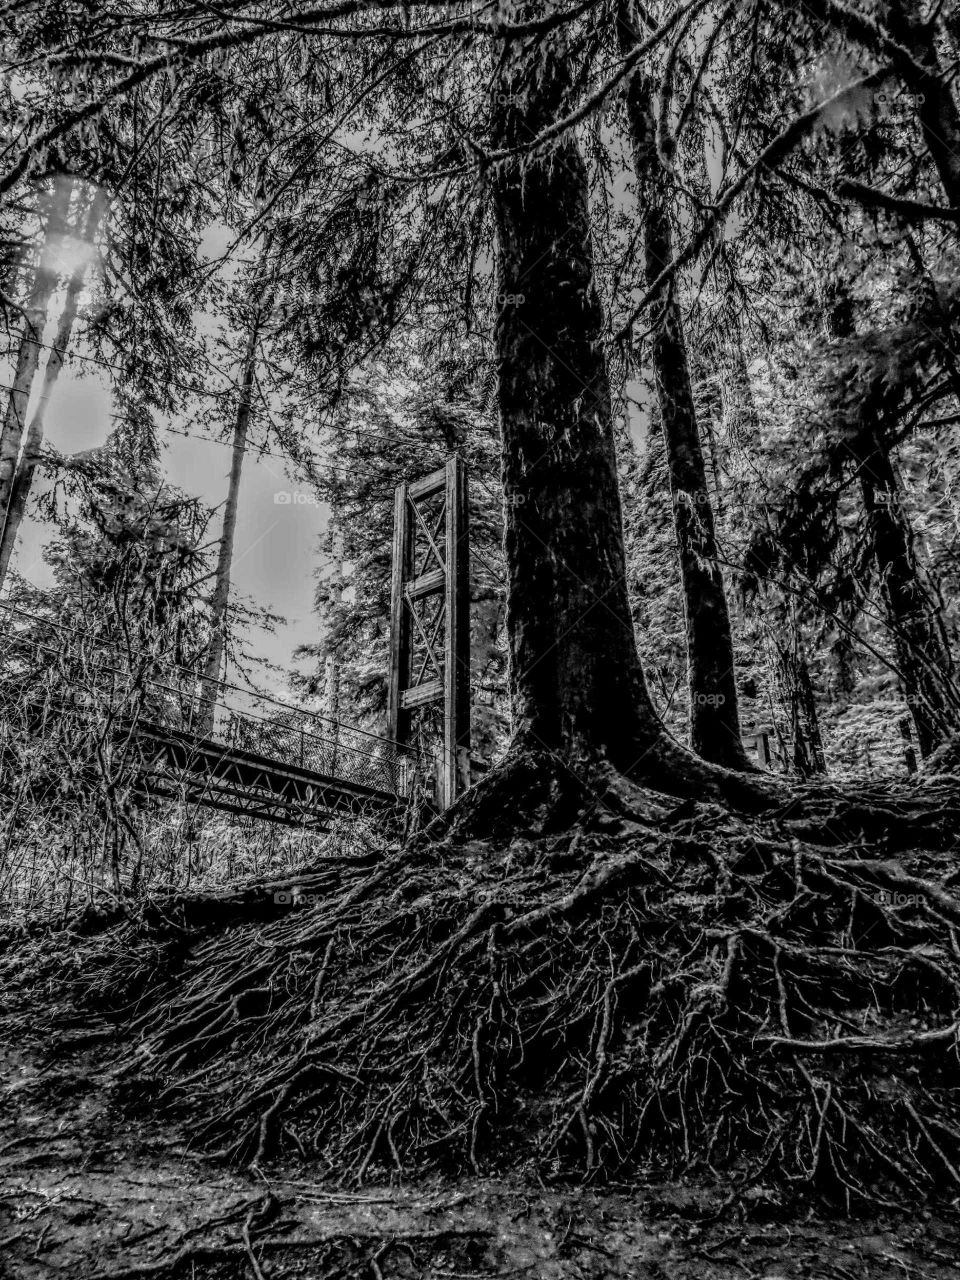 Black and White Architecture of Earth. Suspension Bridge in background. Calming and scerene. "Roots Became Natural Architecture"